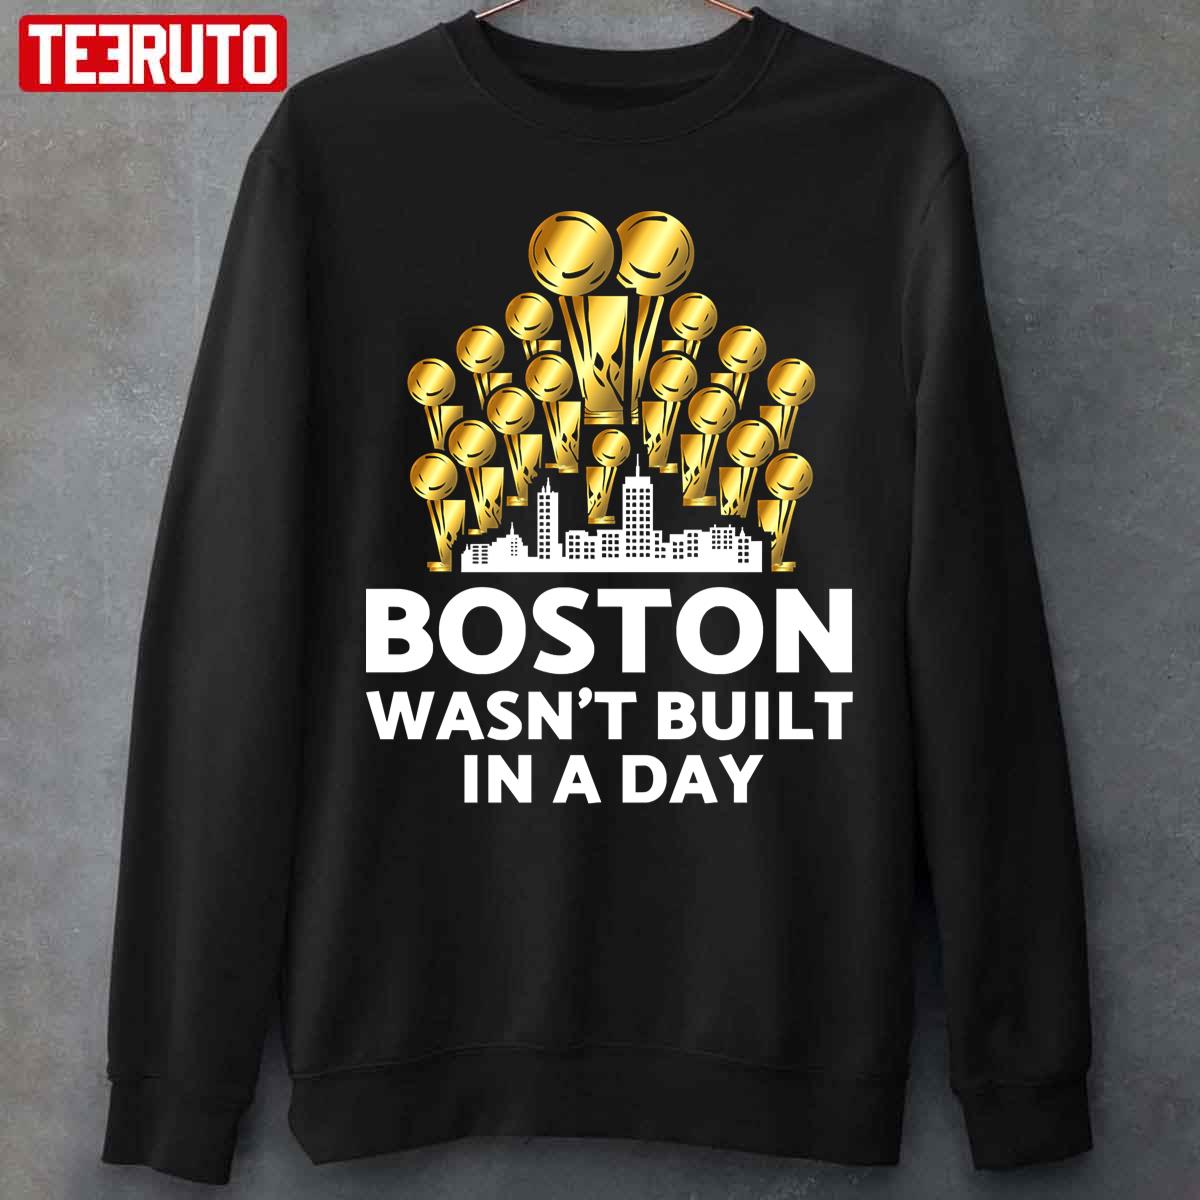 Boston Wasn’t Built In A Day Unisex T-Shirt